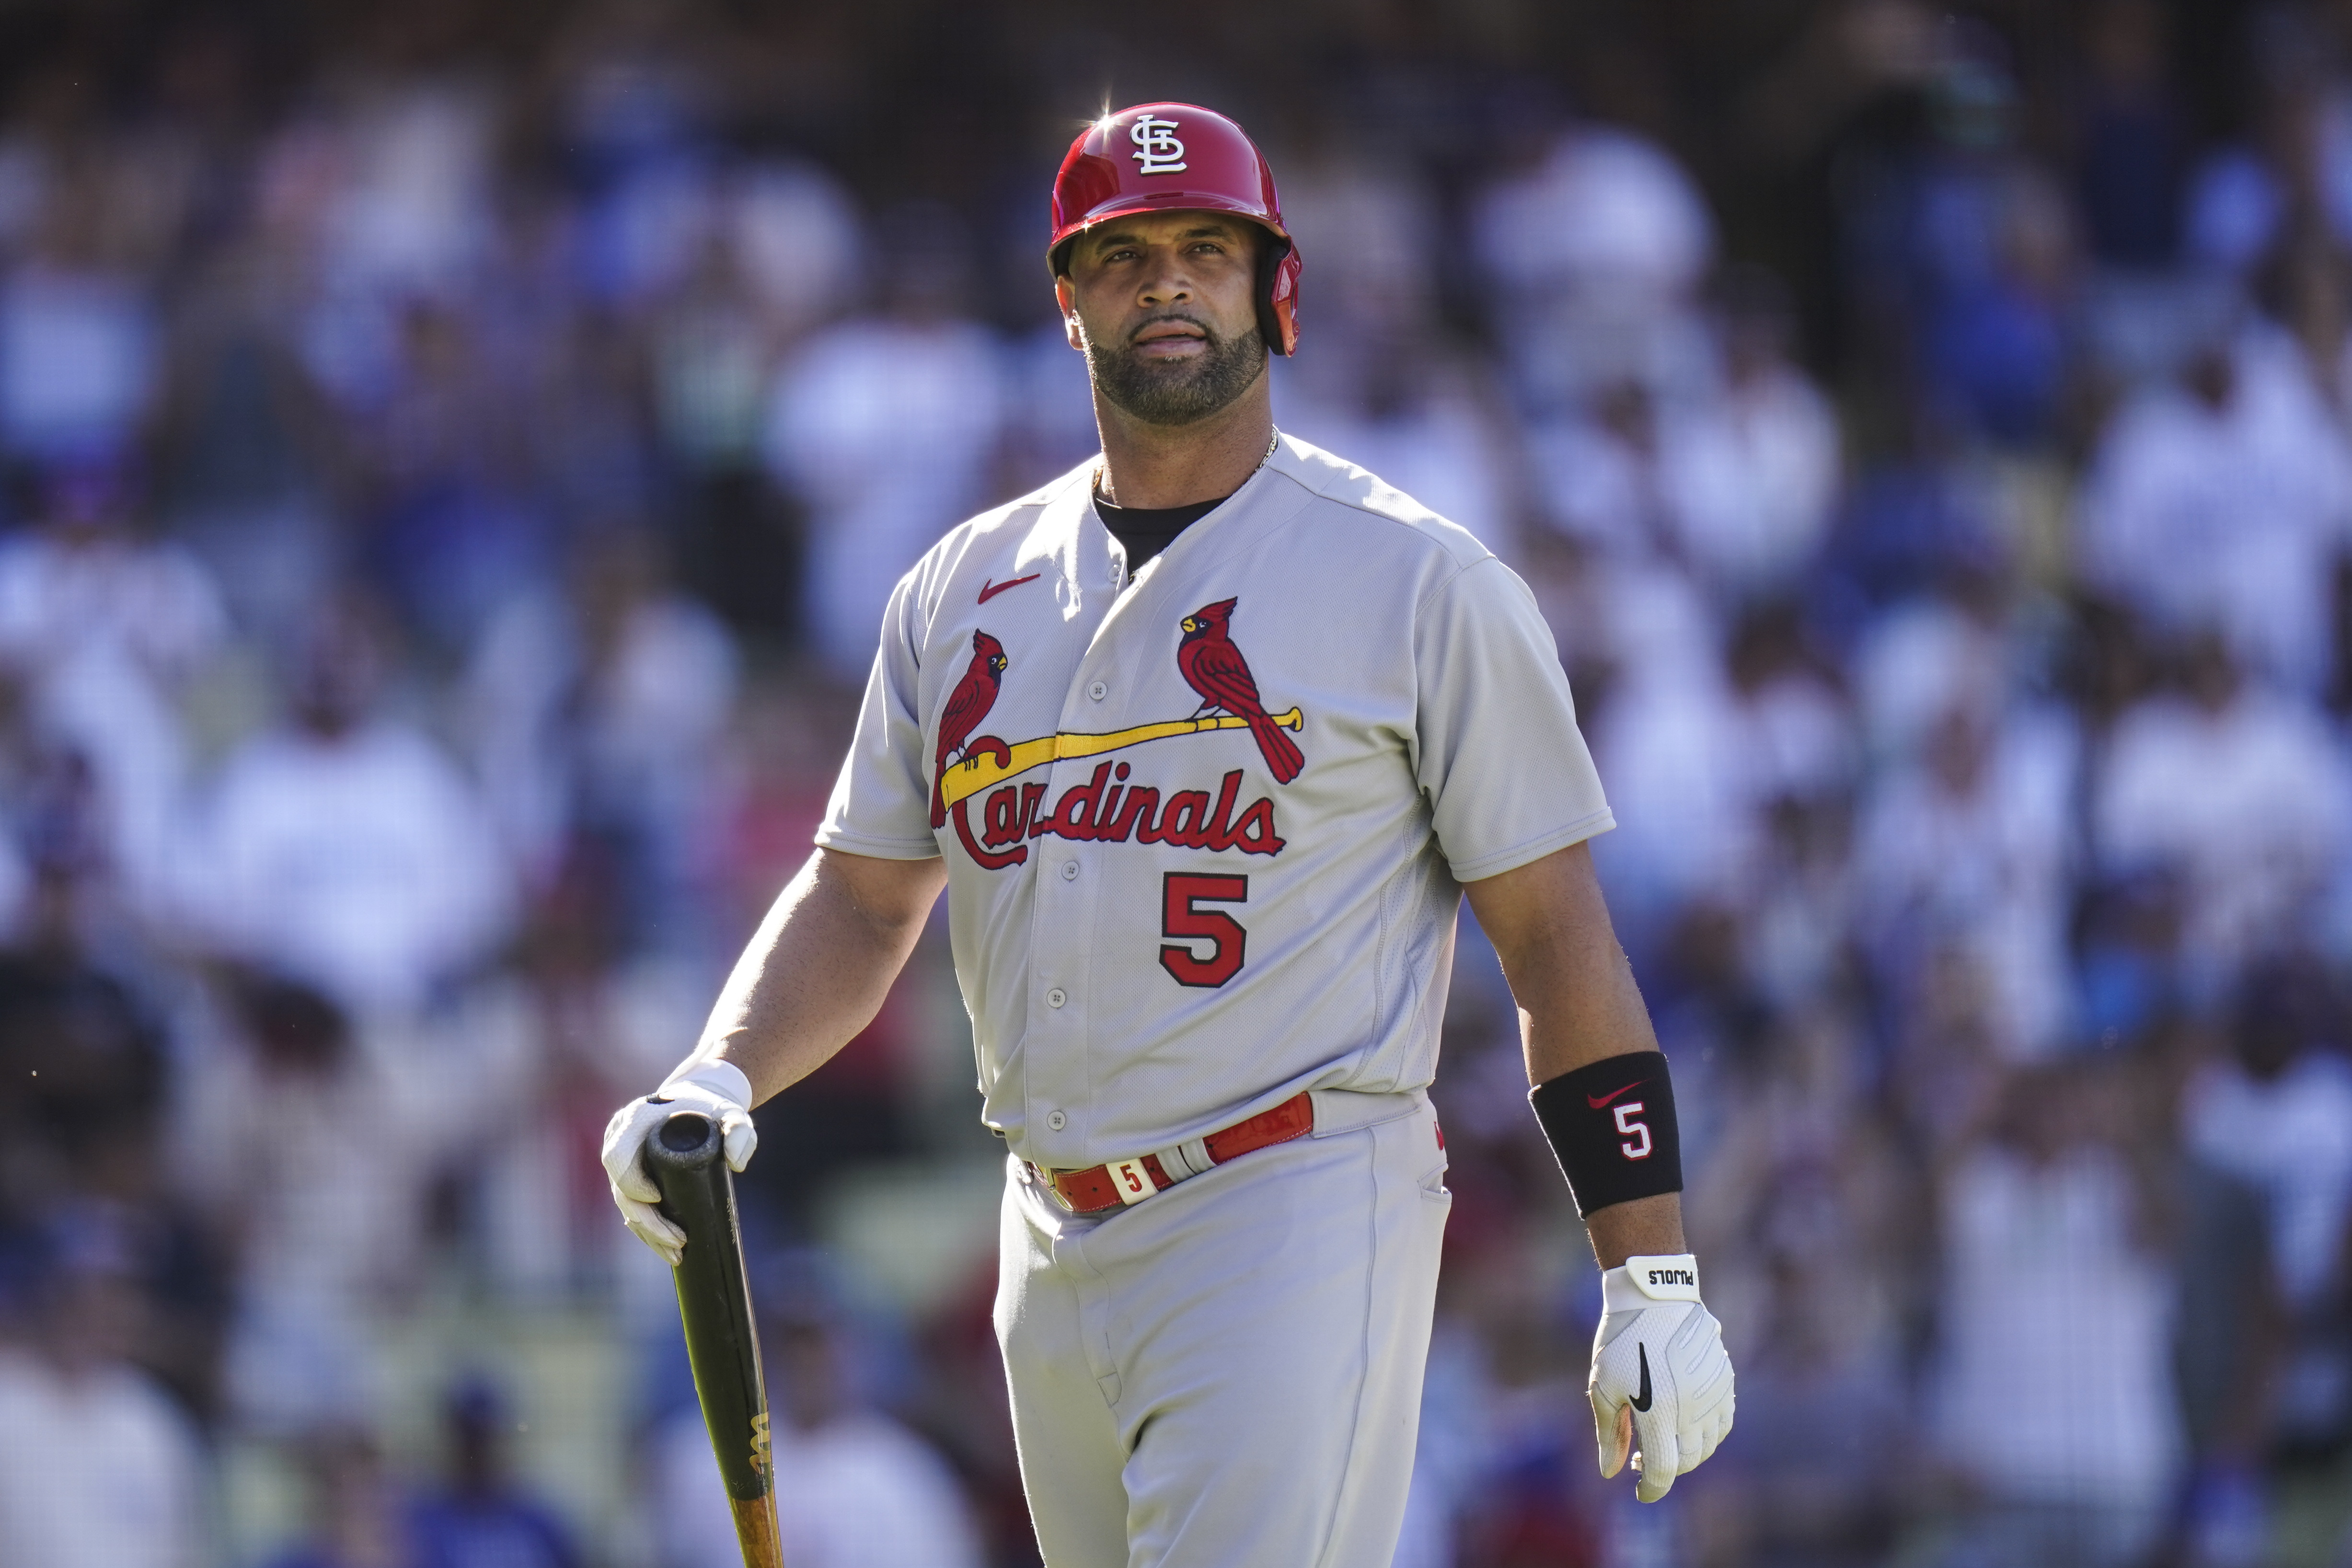 Albert Pujols signs papers, making retirement official – NBC Sports Chicago